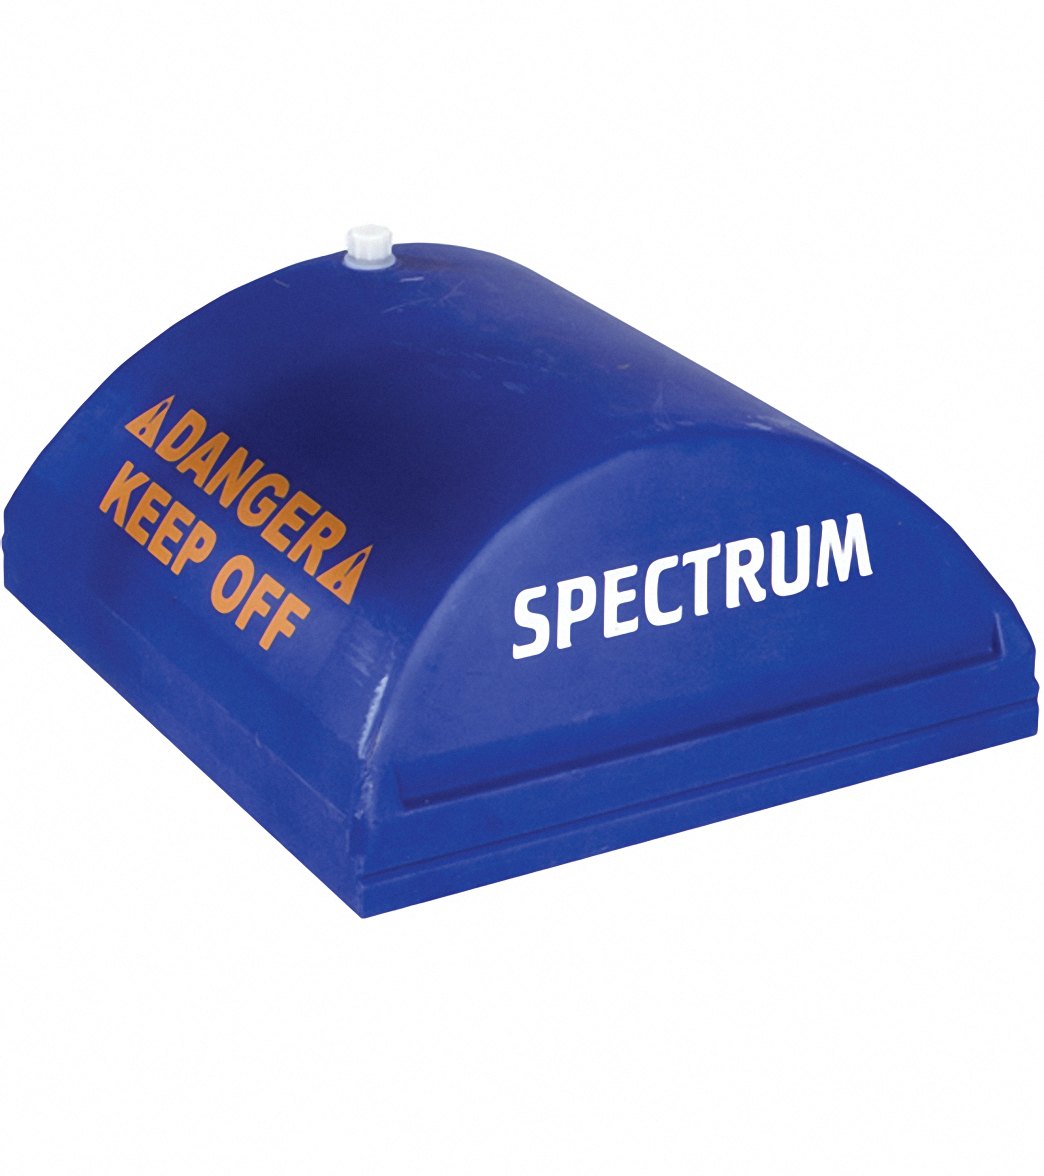 Spectrum Marshall Guard Chair Ballast Assembly